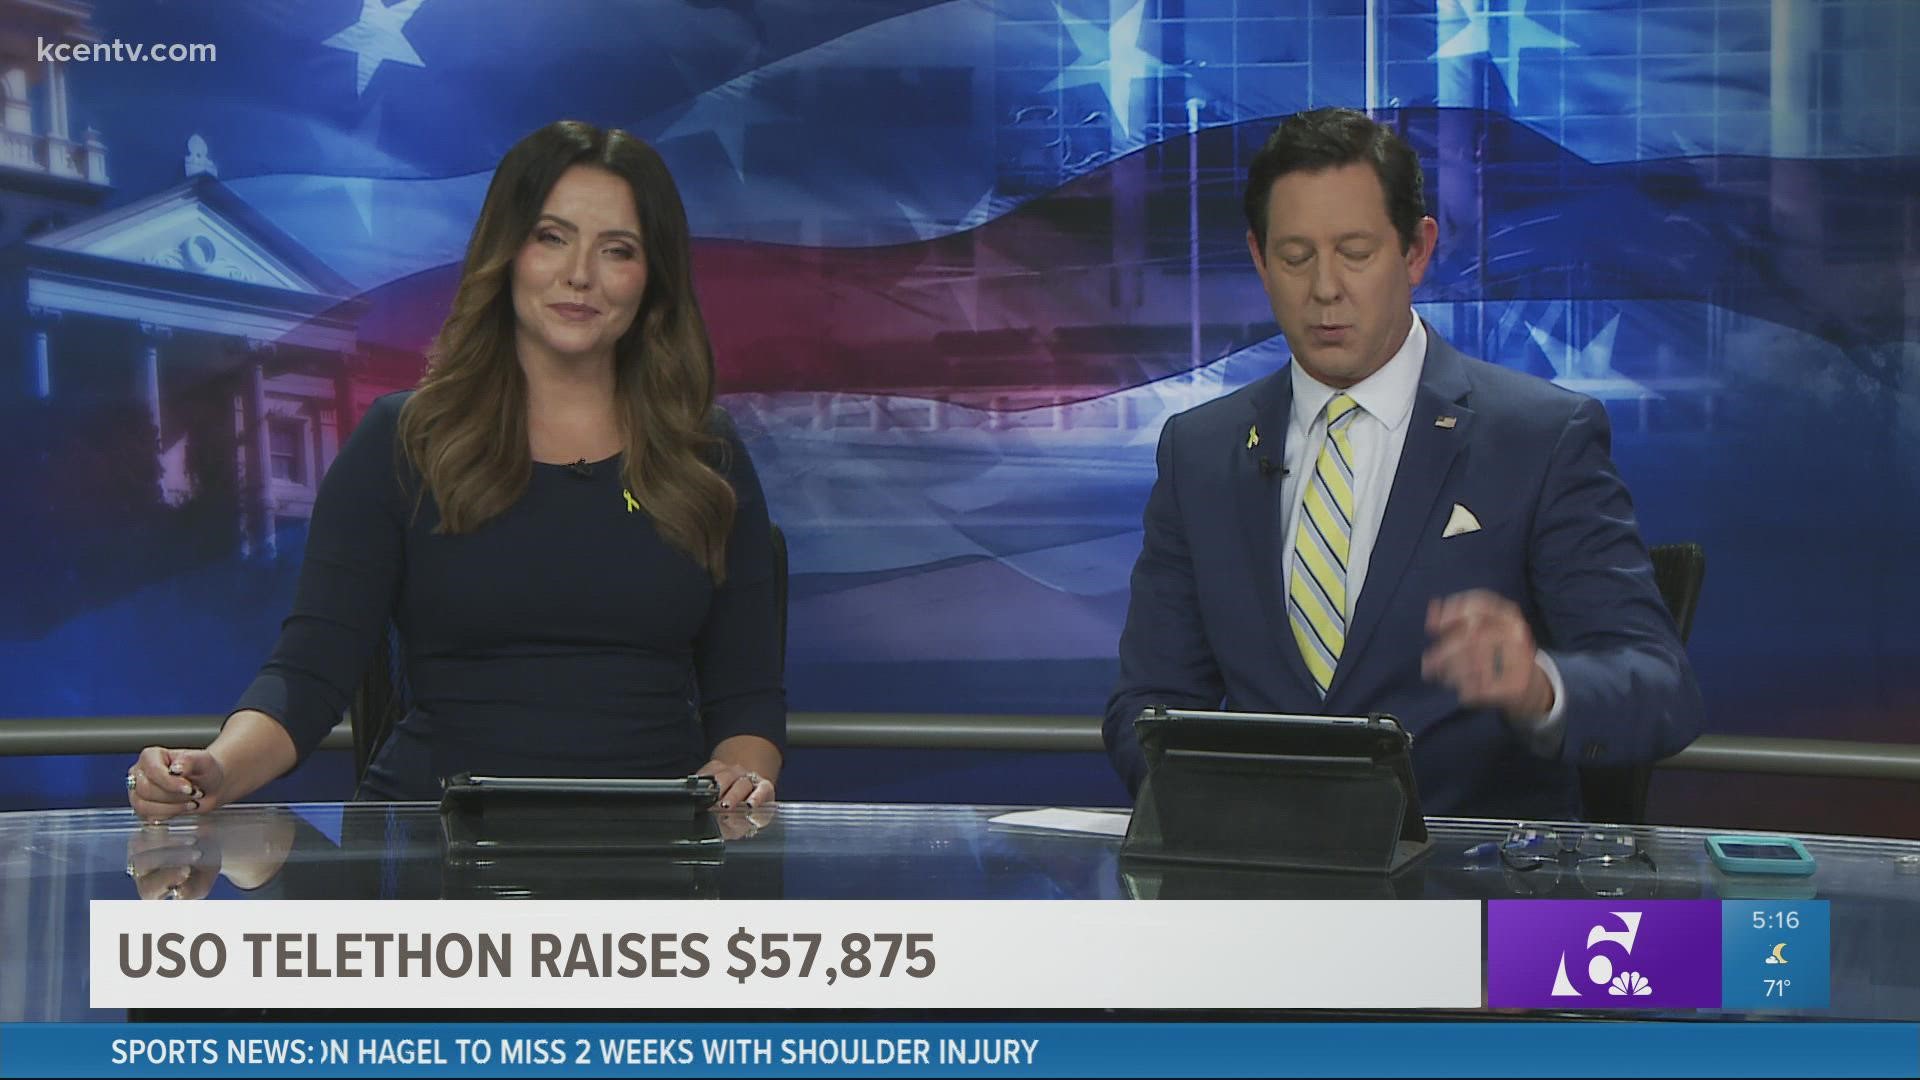 Anchors Lelis Draffin and Kris Radcliffe announce the USO raised $57,875 at Thursday's Telethon.